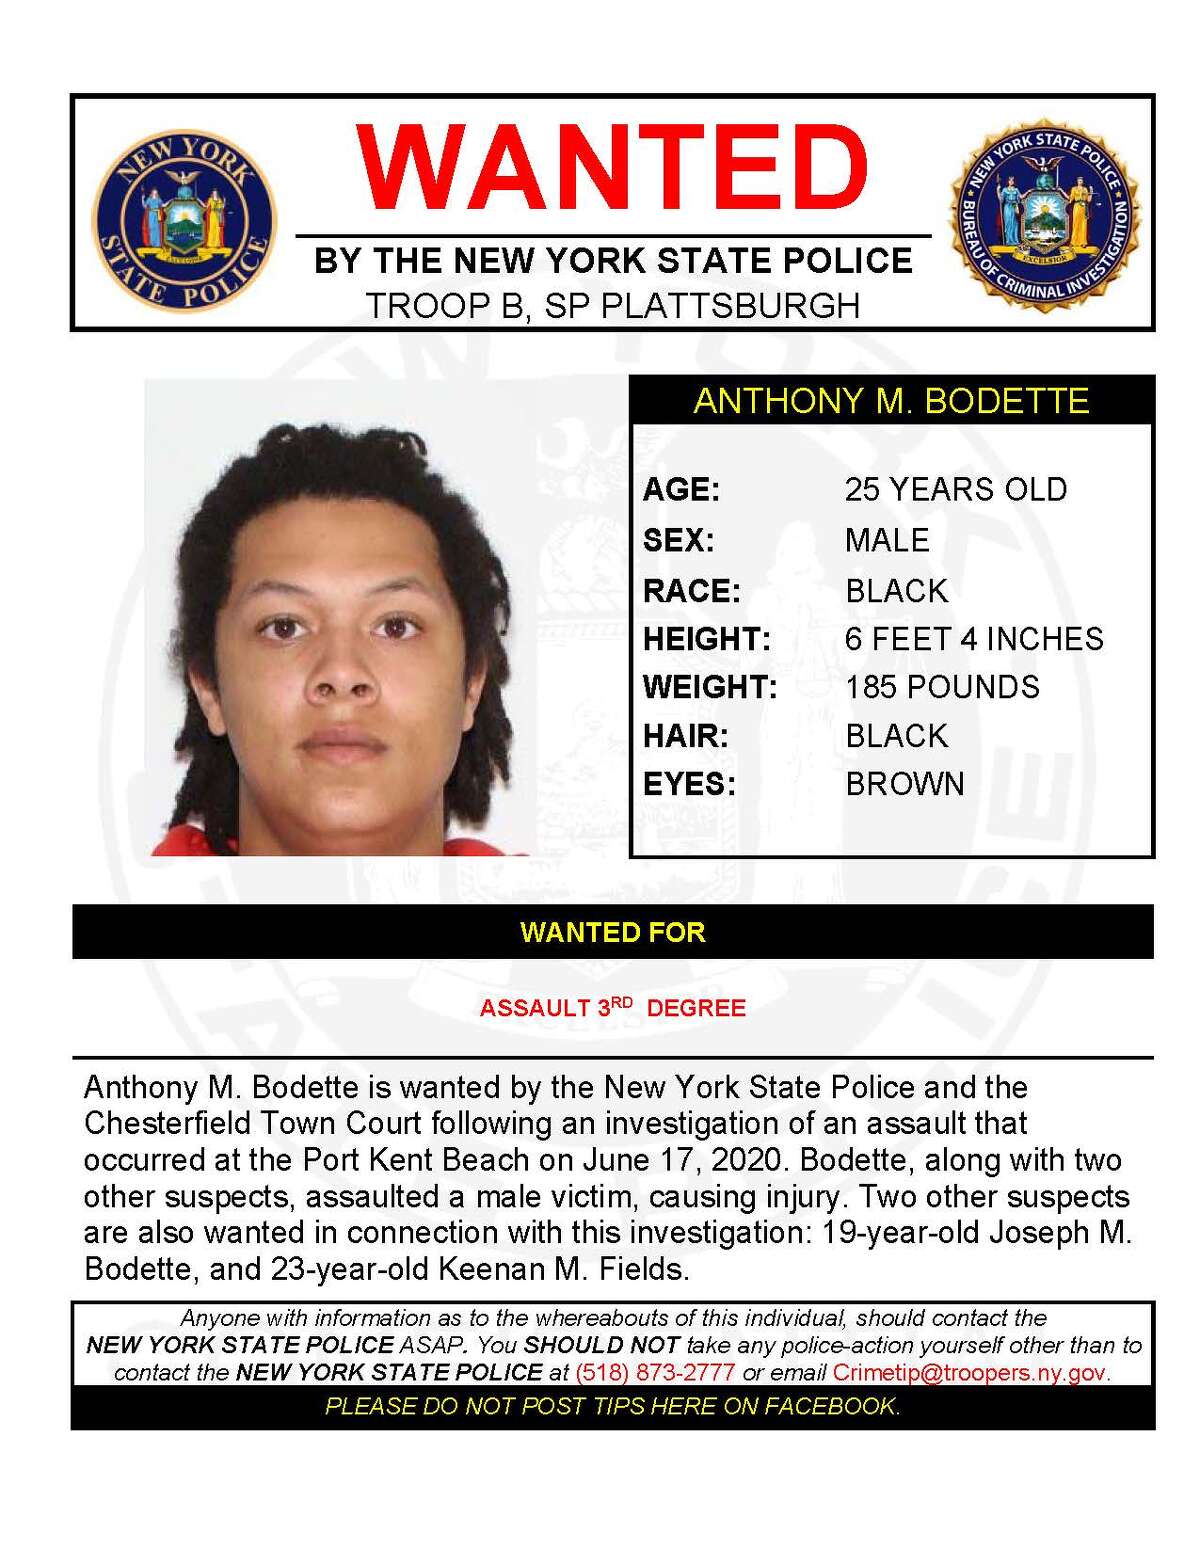 ANTHONY M. BODETTE Anthony M. Bodette is wanted by the New York State Police and the Chesterfield Town Court following an investigation of an assault at the Port Kent Beach on June 17, 2020. Bodette, along with two other suspects, assaulted a male victim causing injury. Two other suspects are also wanted in connection with this investigation: 19-year-old Joseph Bodette, and 23-year-old Keenan M. Fields.